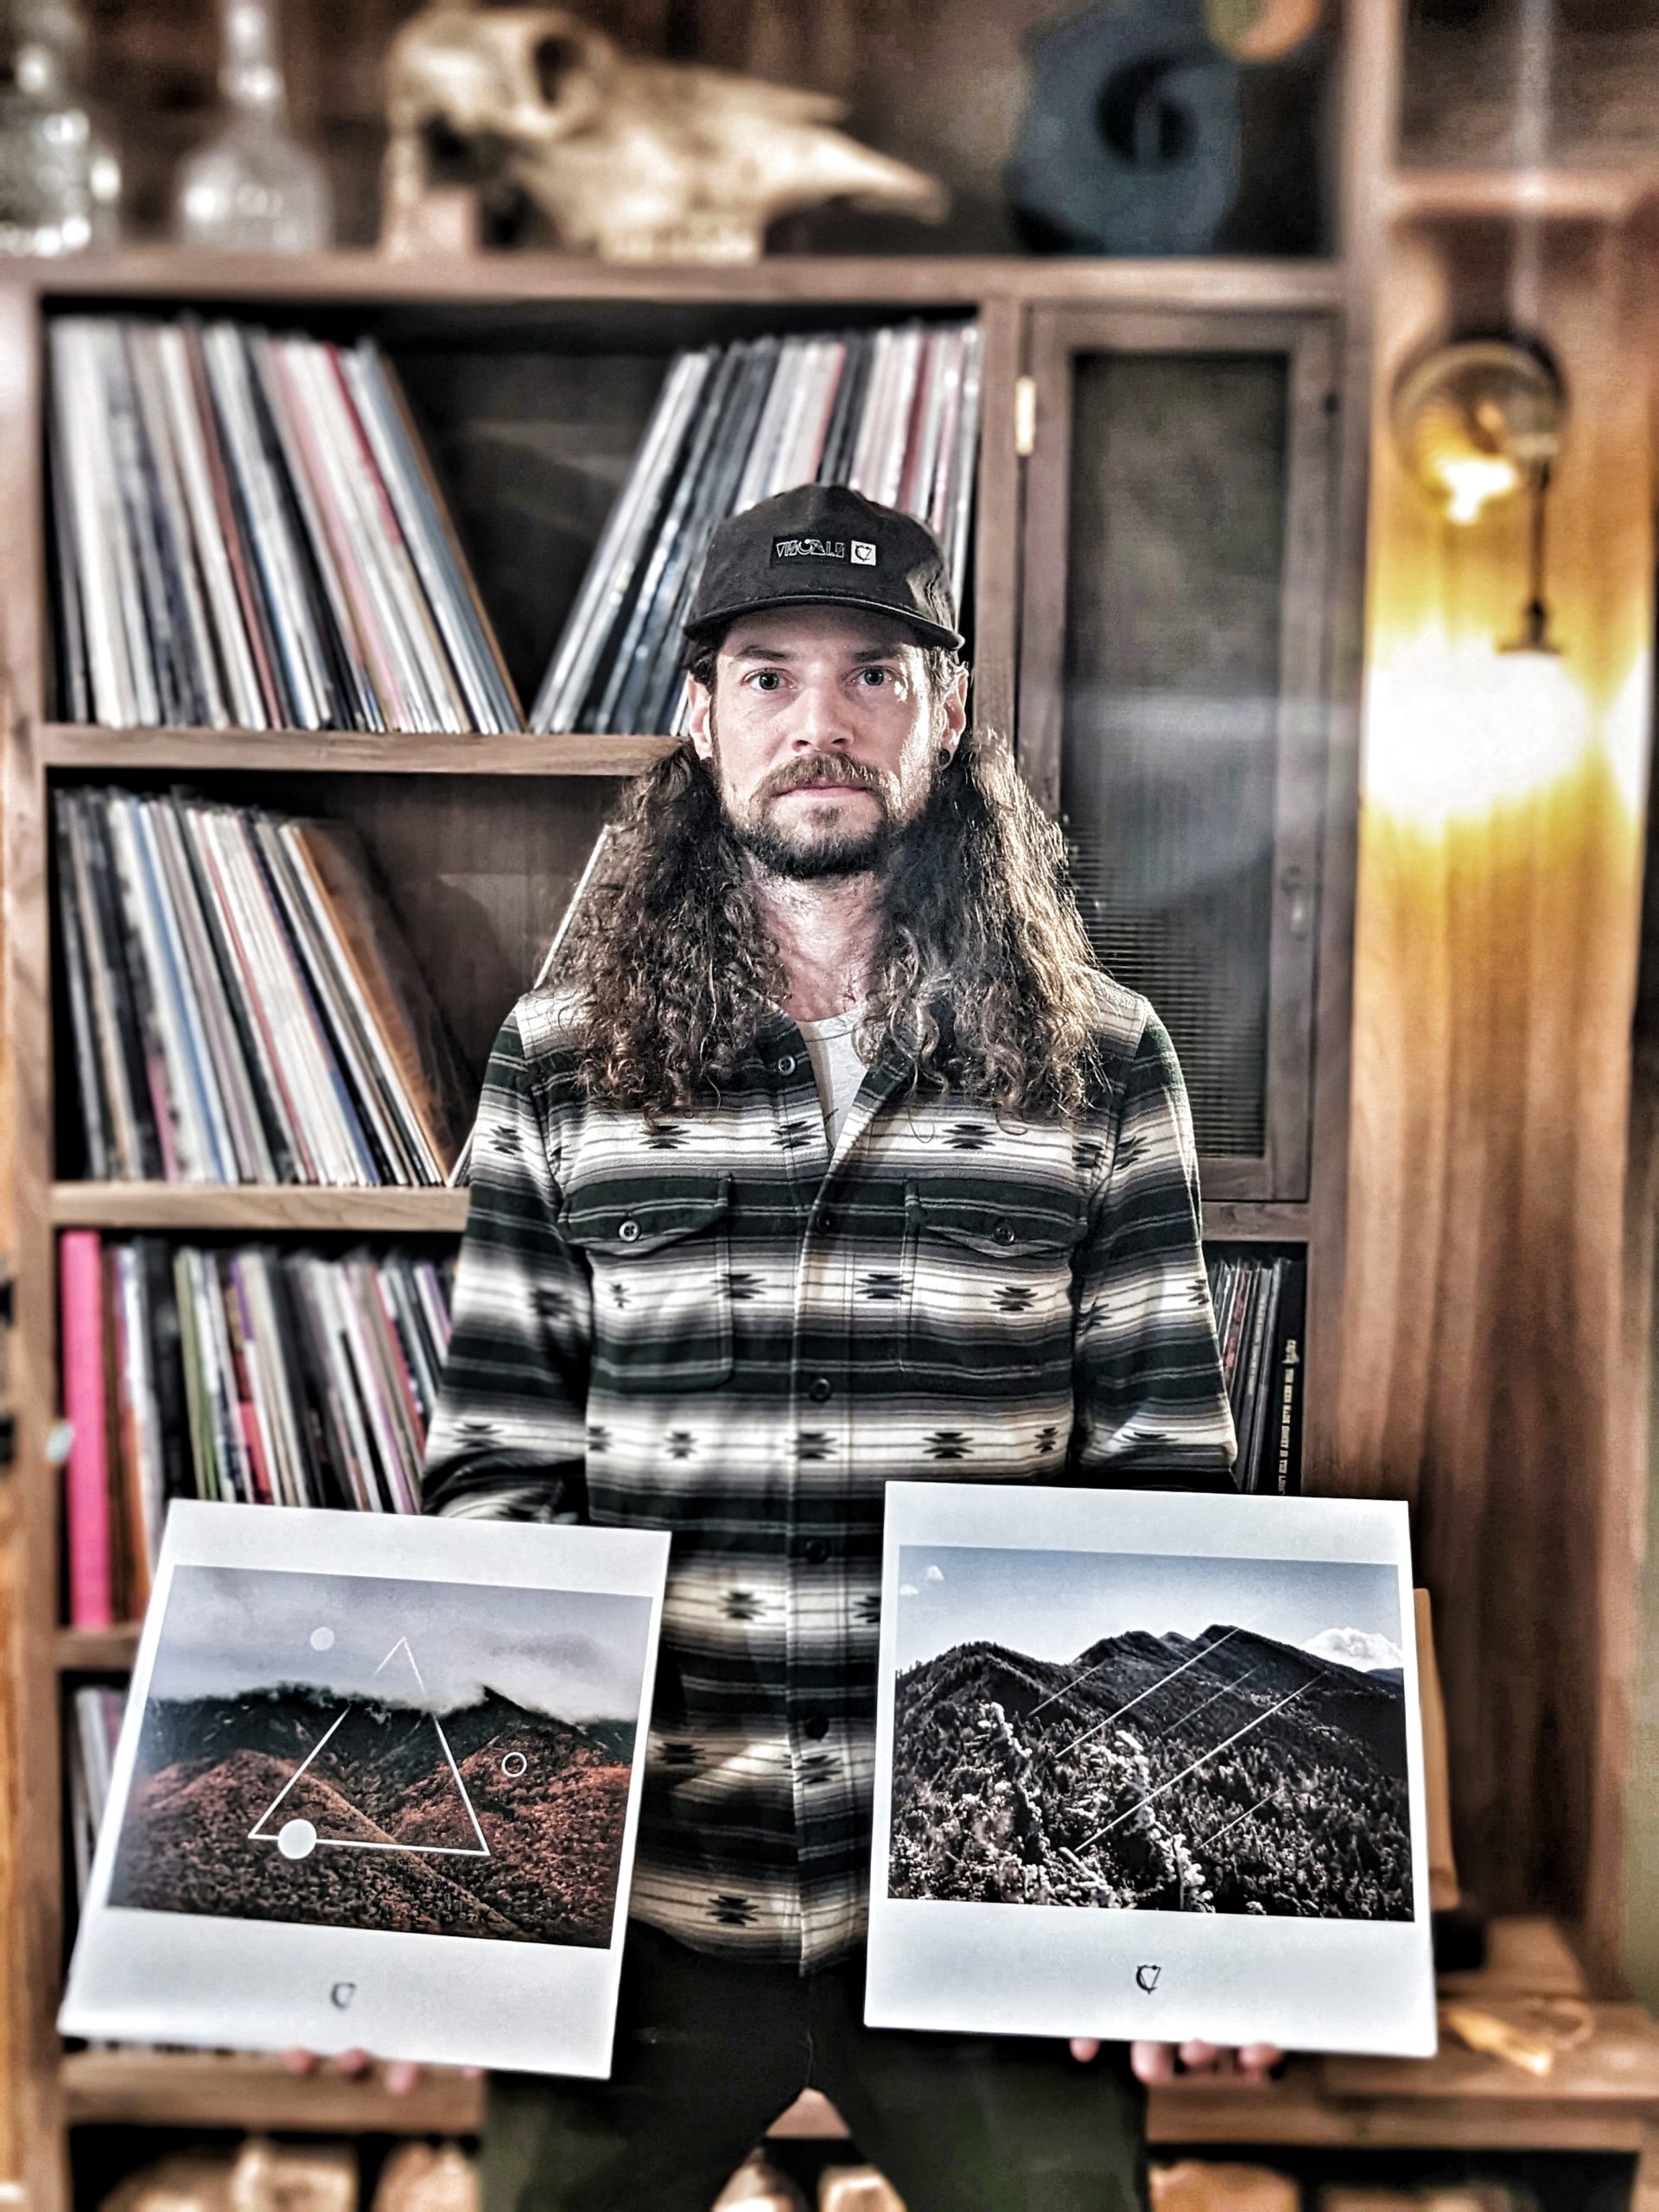 Tim Gormley, wearing a black cap and a button-down shirt, holds two album covers while standing in front of his record collection.